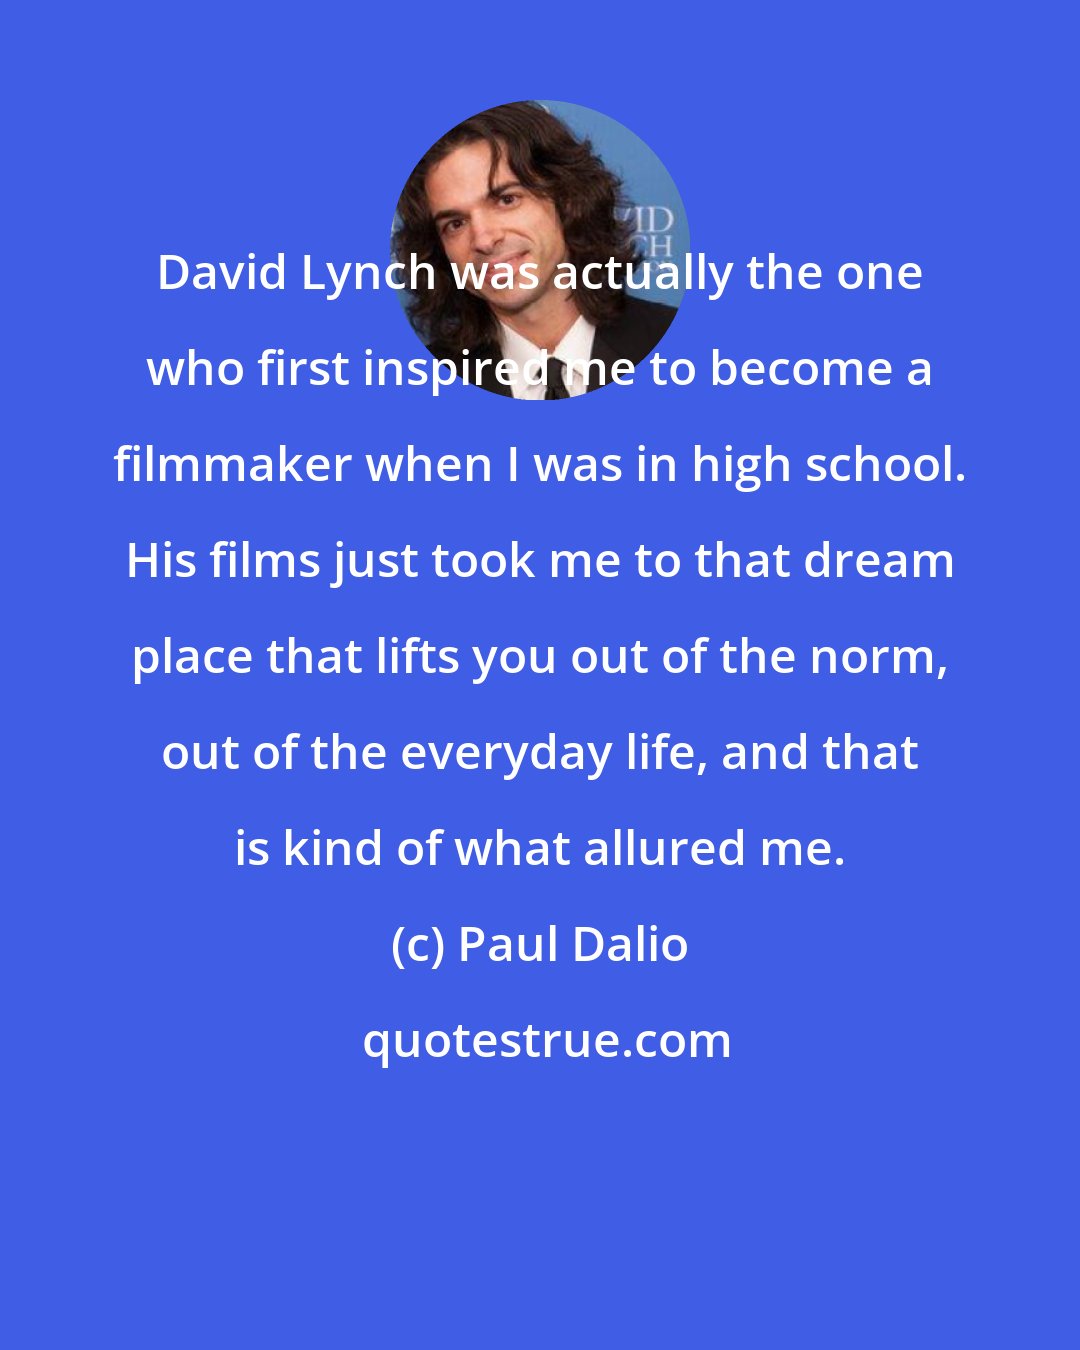 Paul Dalio: David Lynch was actually the one who first inspired me to become a filmmaker when I was in high school. His films just took me to that dream place that lifts you out of the norm, out of the everyday life, and that is kind of what allured me.